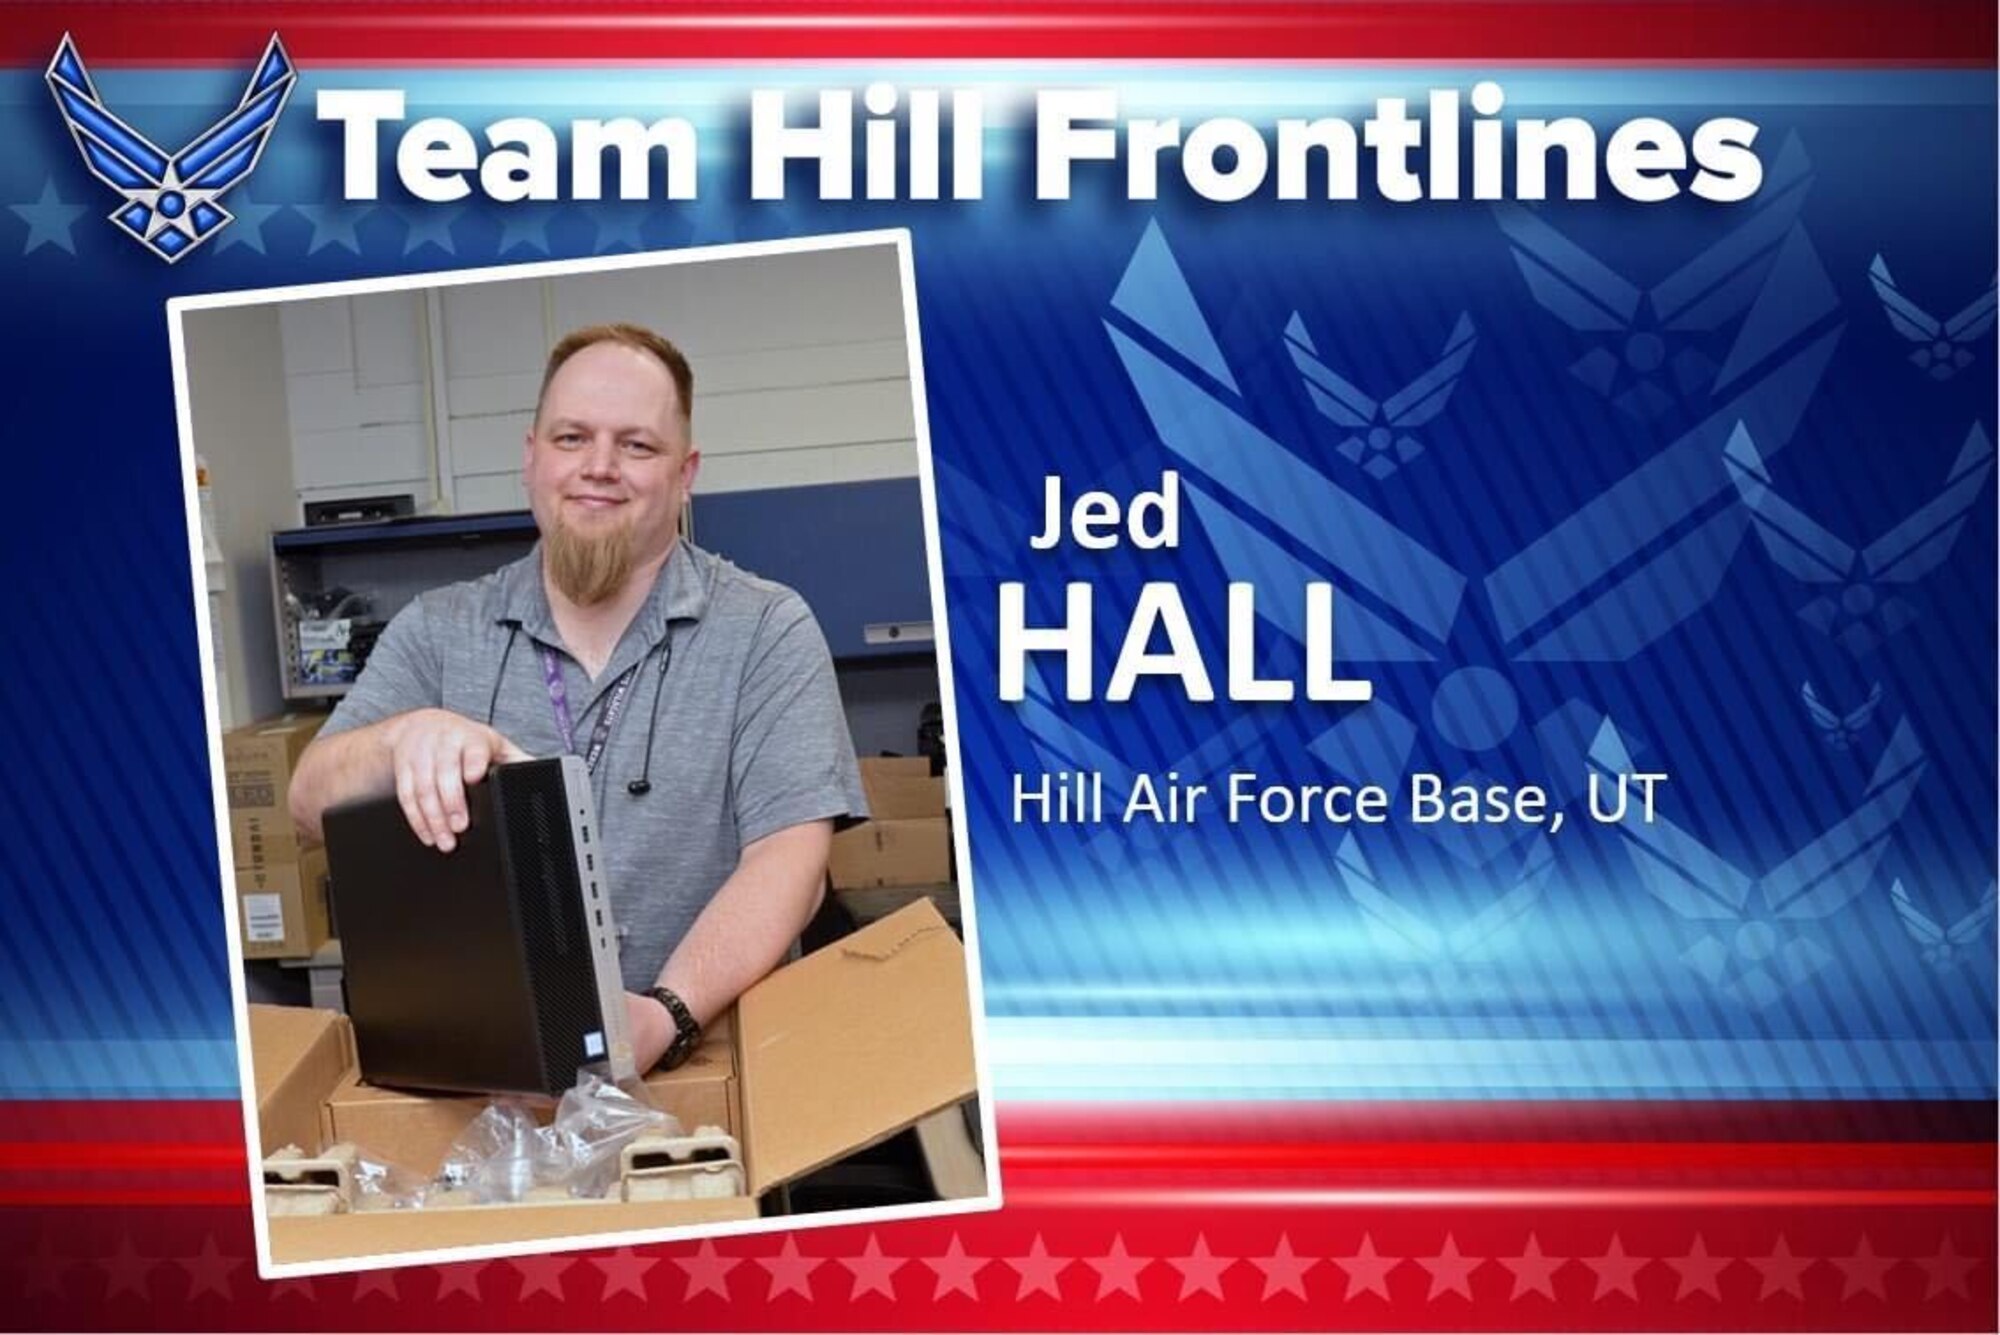 Team Hill Frontlines: Jed Hall